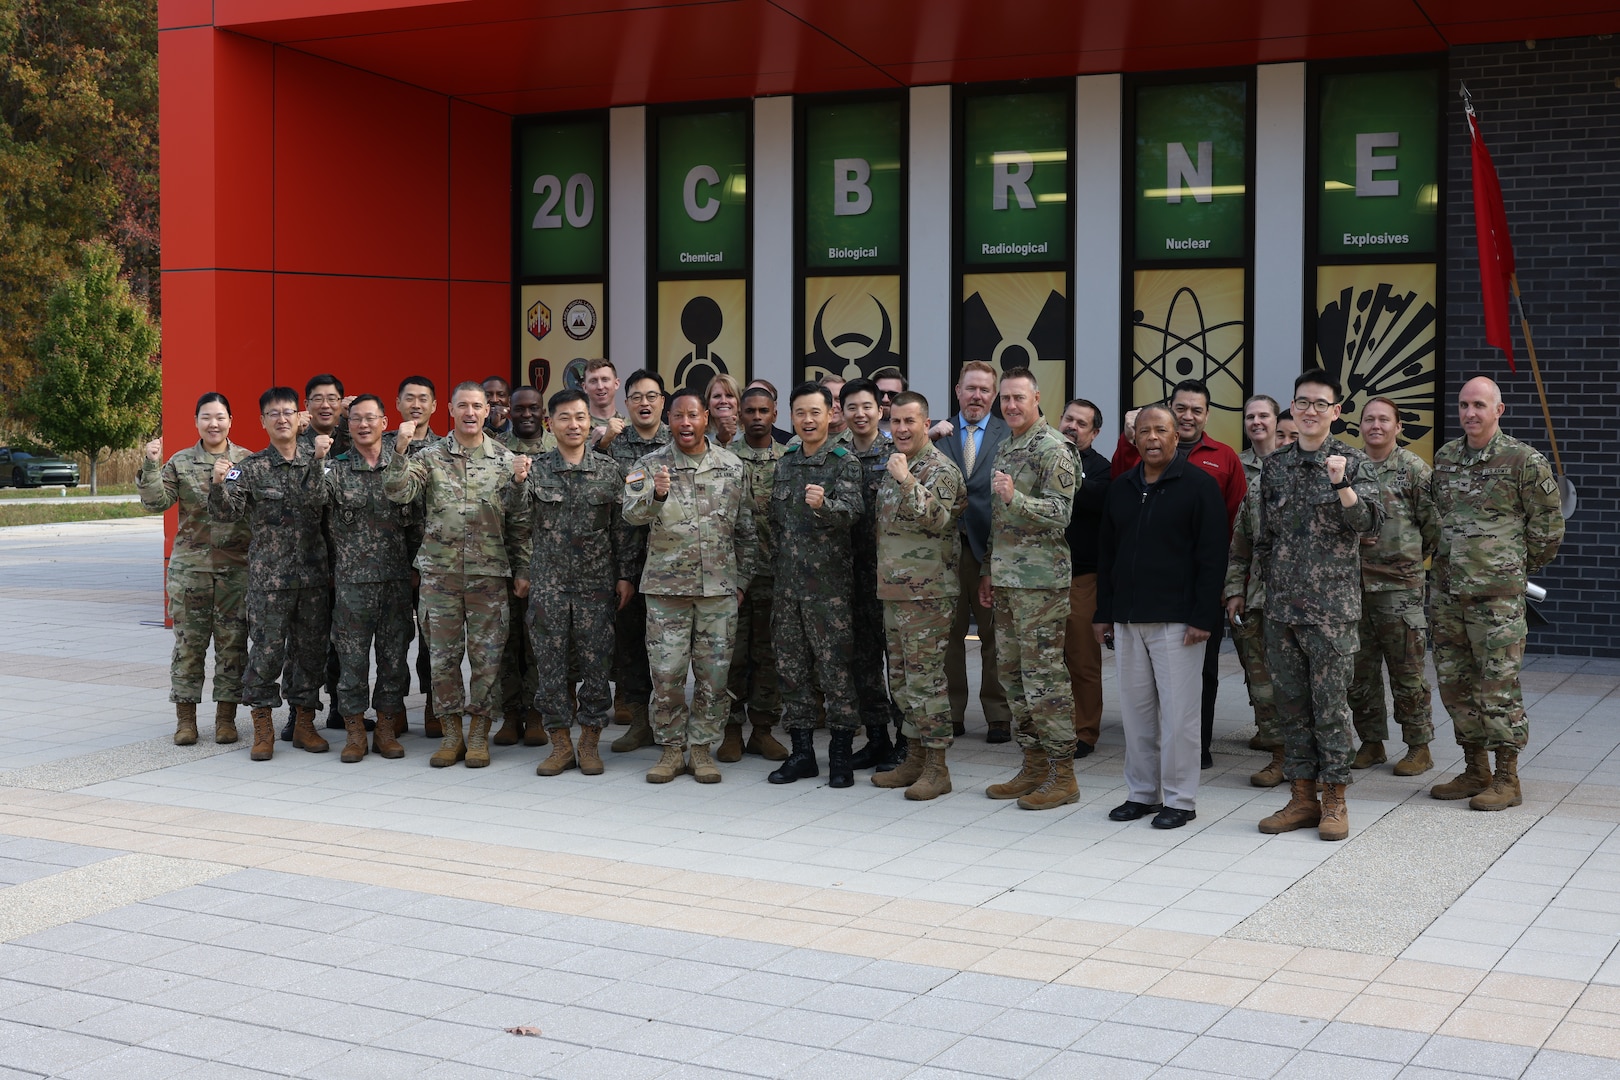 American and South Korean military leaders forged even stronger bonds during the 70th anniversary of the Republic of Korea-U.S. Alliance, Nov. 1. The U.S. Army’s 20th Chemical, Biological, Radiological, Nuclear, Explosives (CBRNE) Command hosted Exercise Liberty Shield with the Republic of Korea CBRN Defense Command. U.S. Army photo by Angel D. Martinez-Navedo.